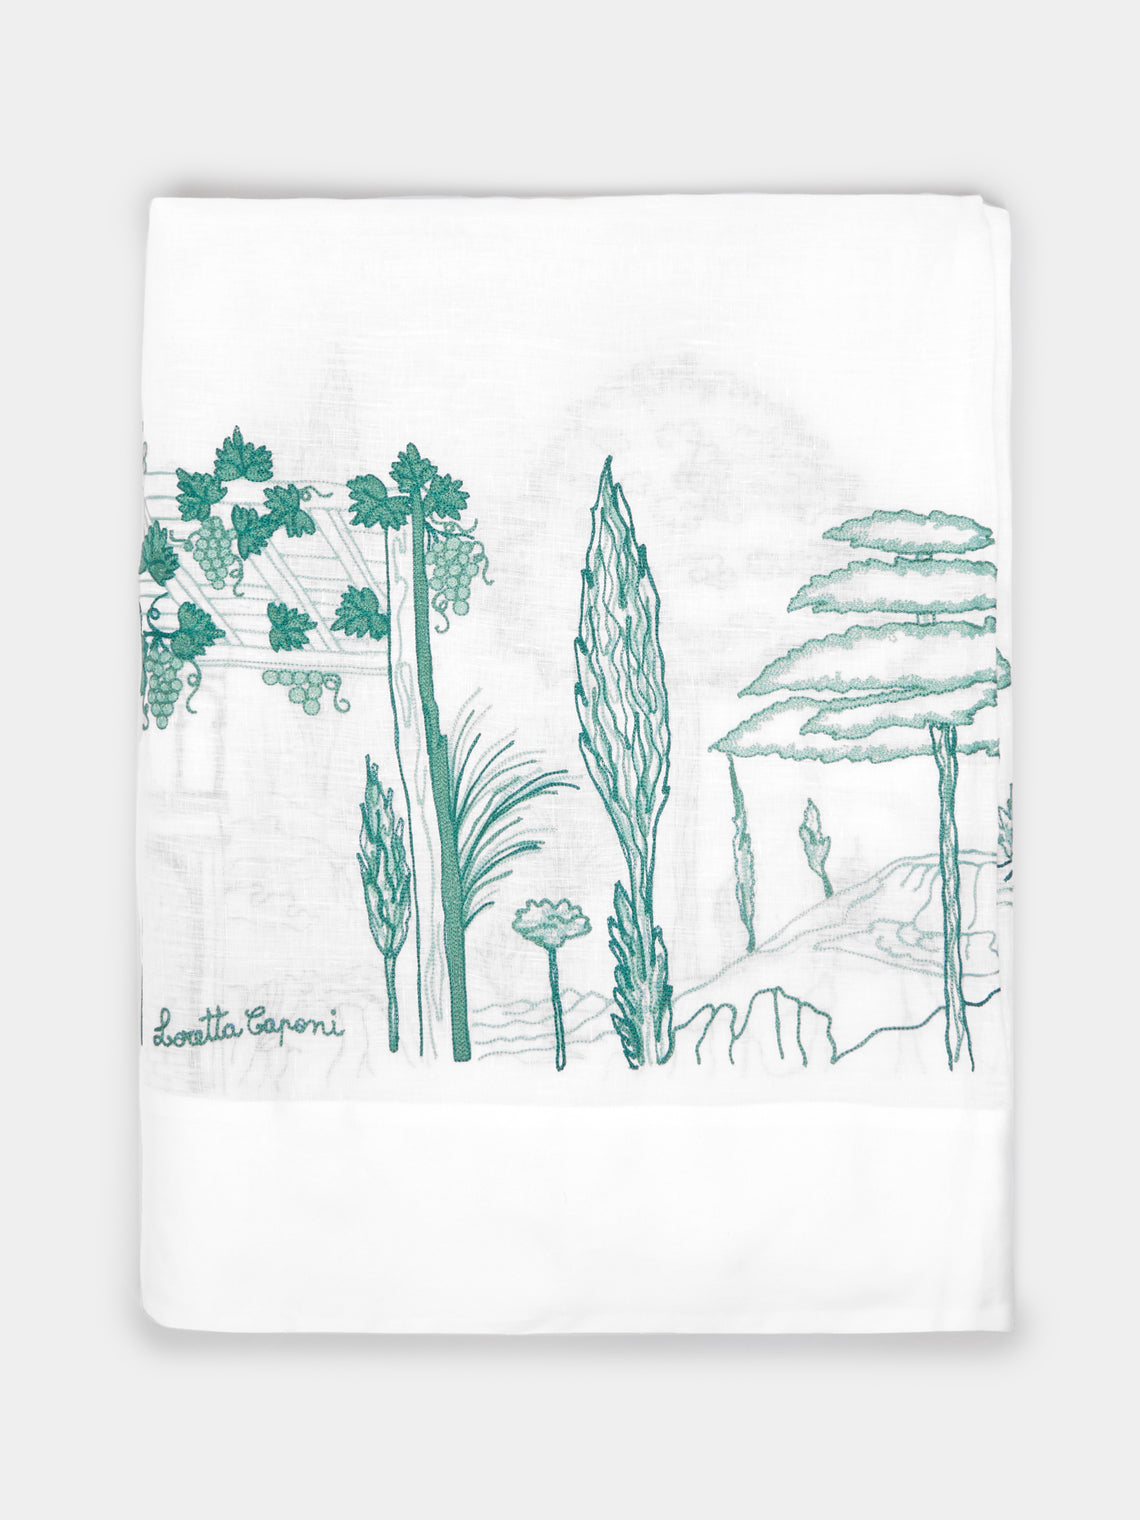 Loretta Caponi - Tuscany Hand-Embroiderd Linen Tablecloth and Napkins (Set of 12) -  - ABASK